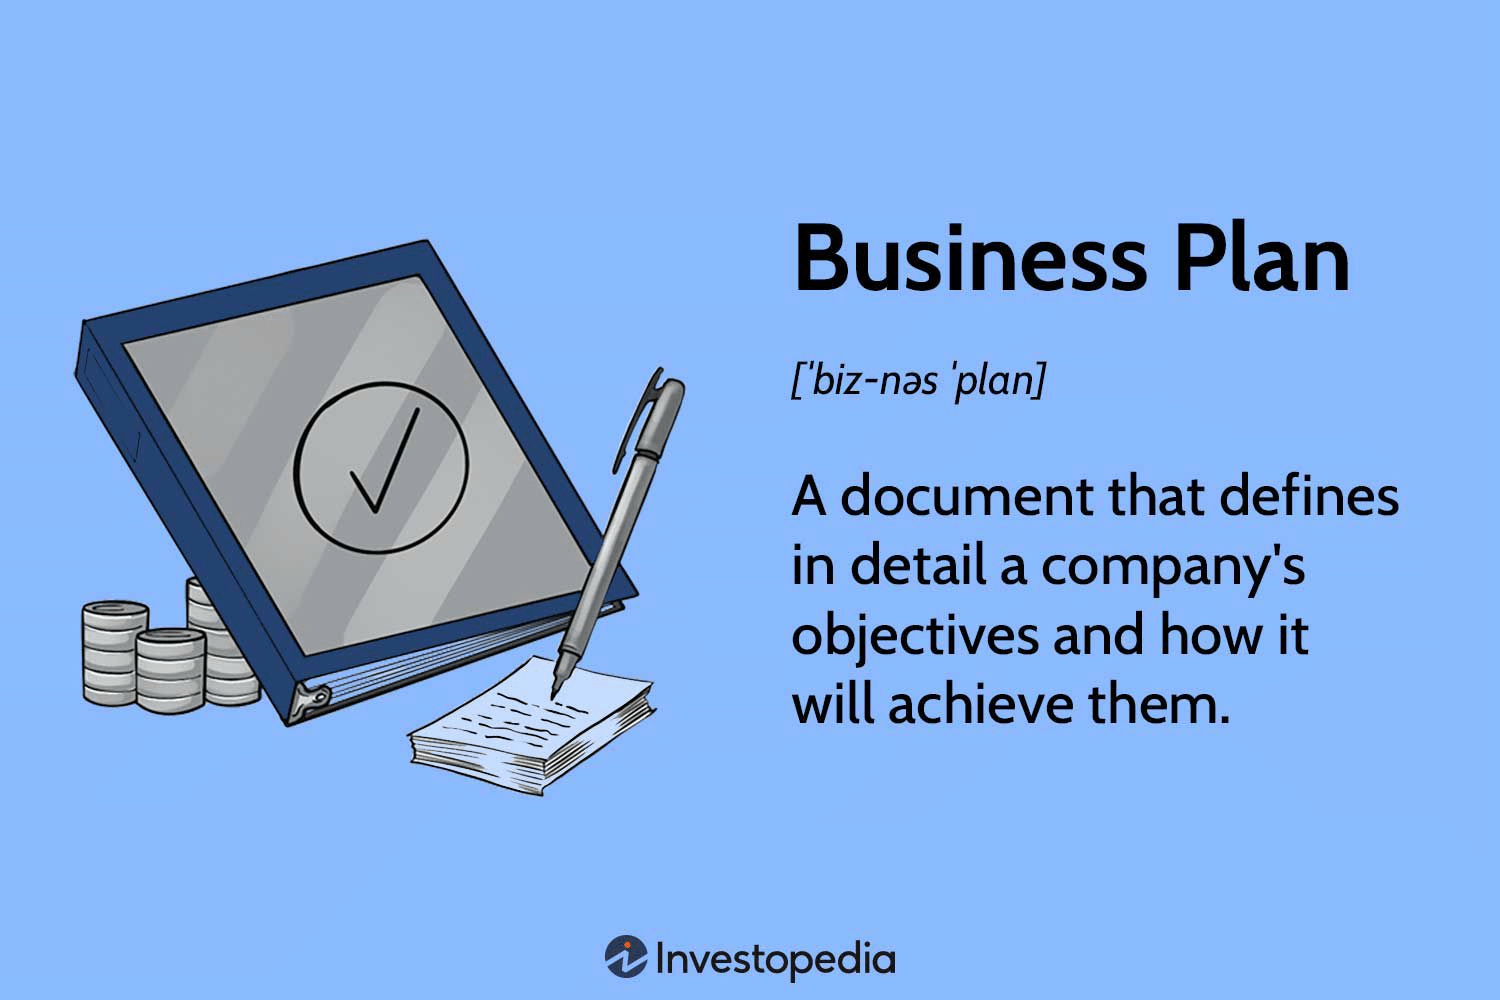 Business Plan For The New Business